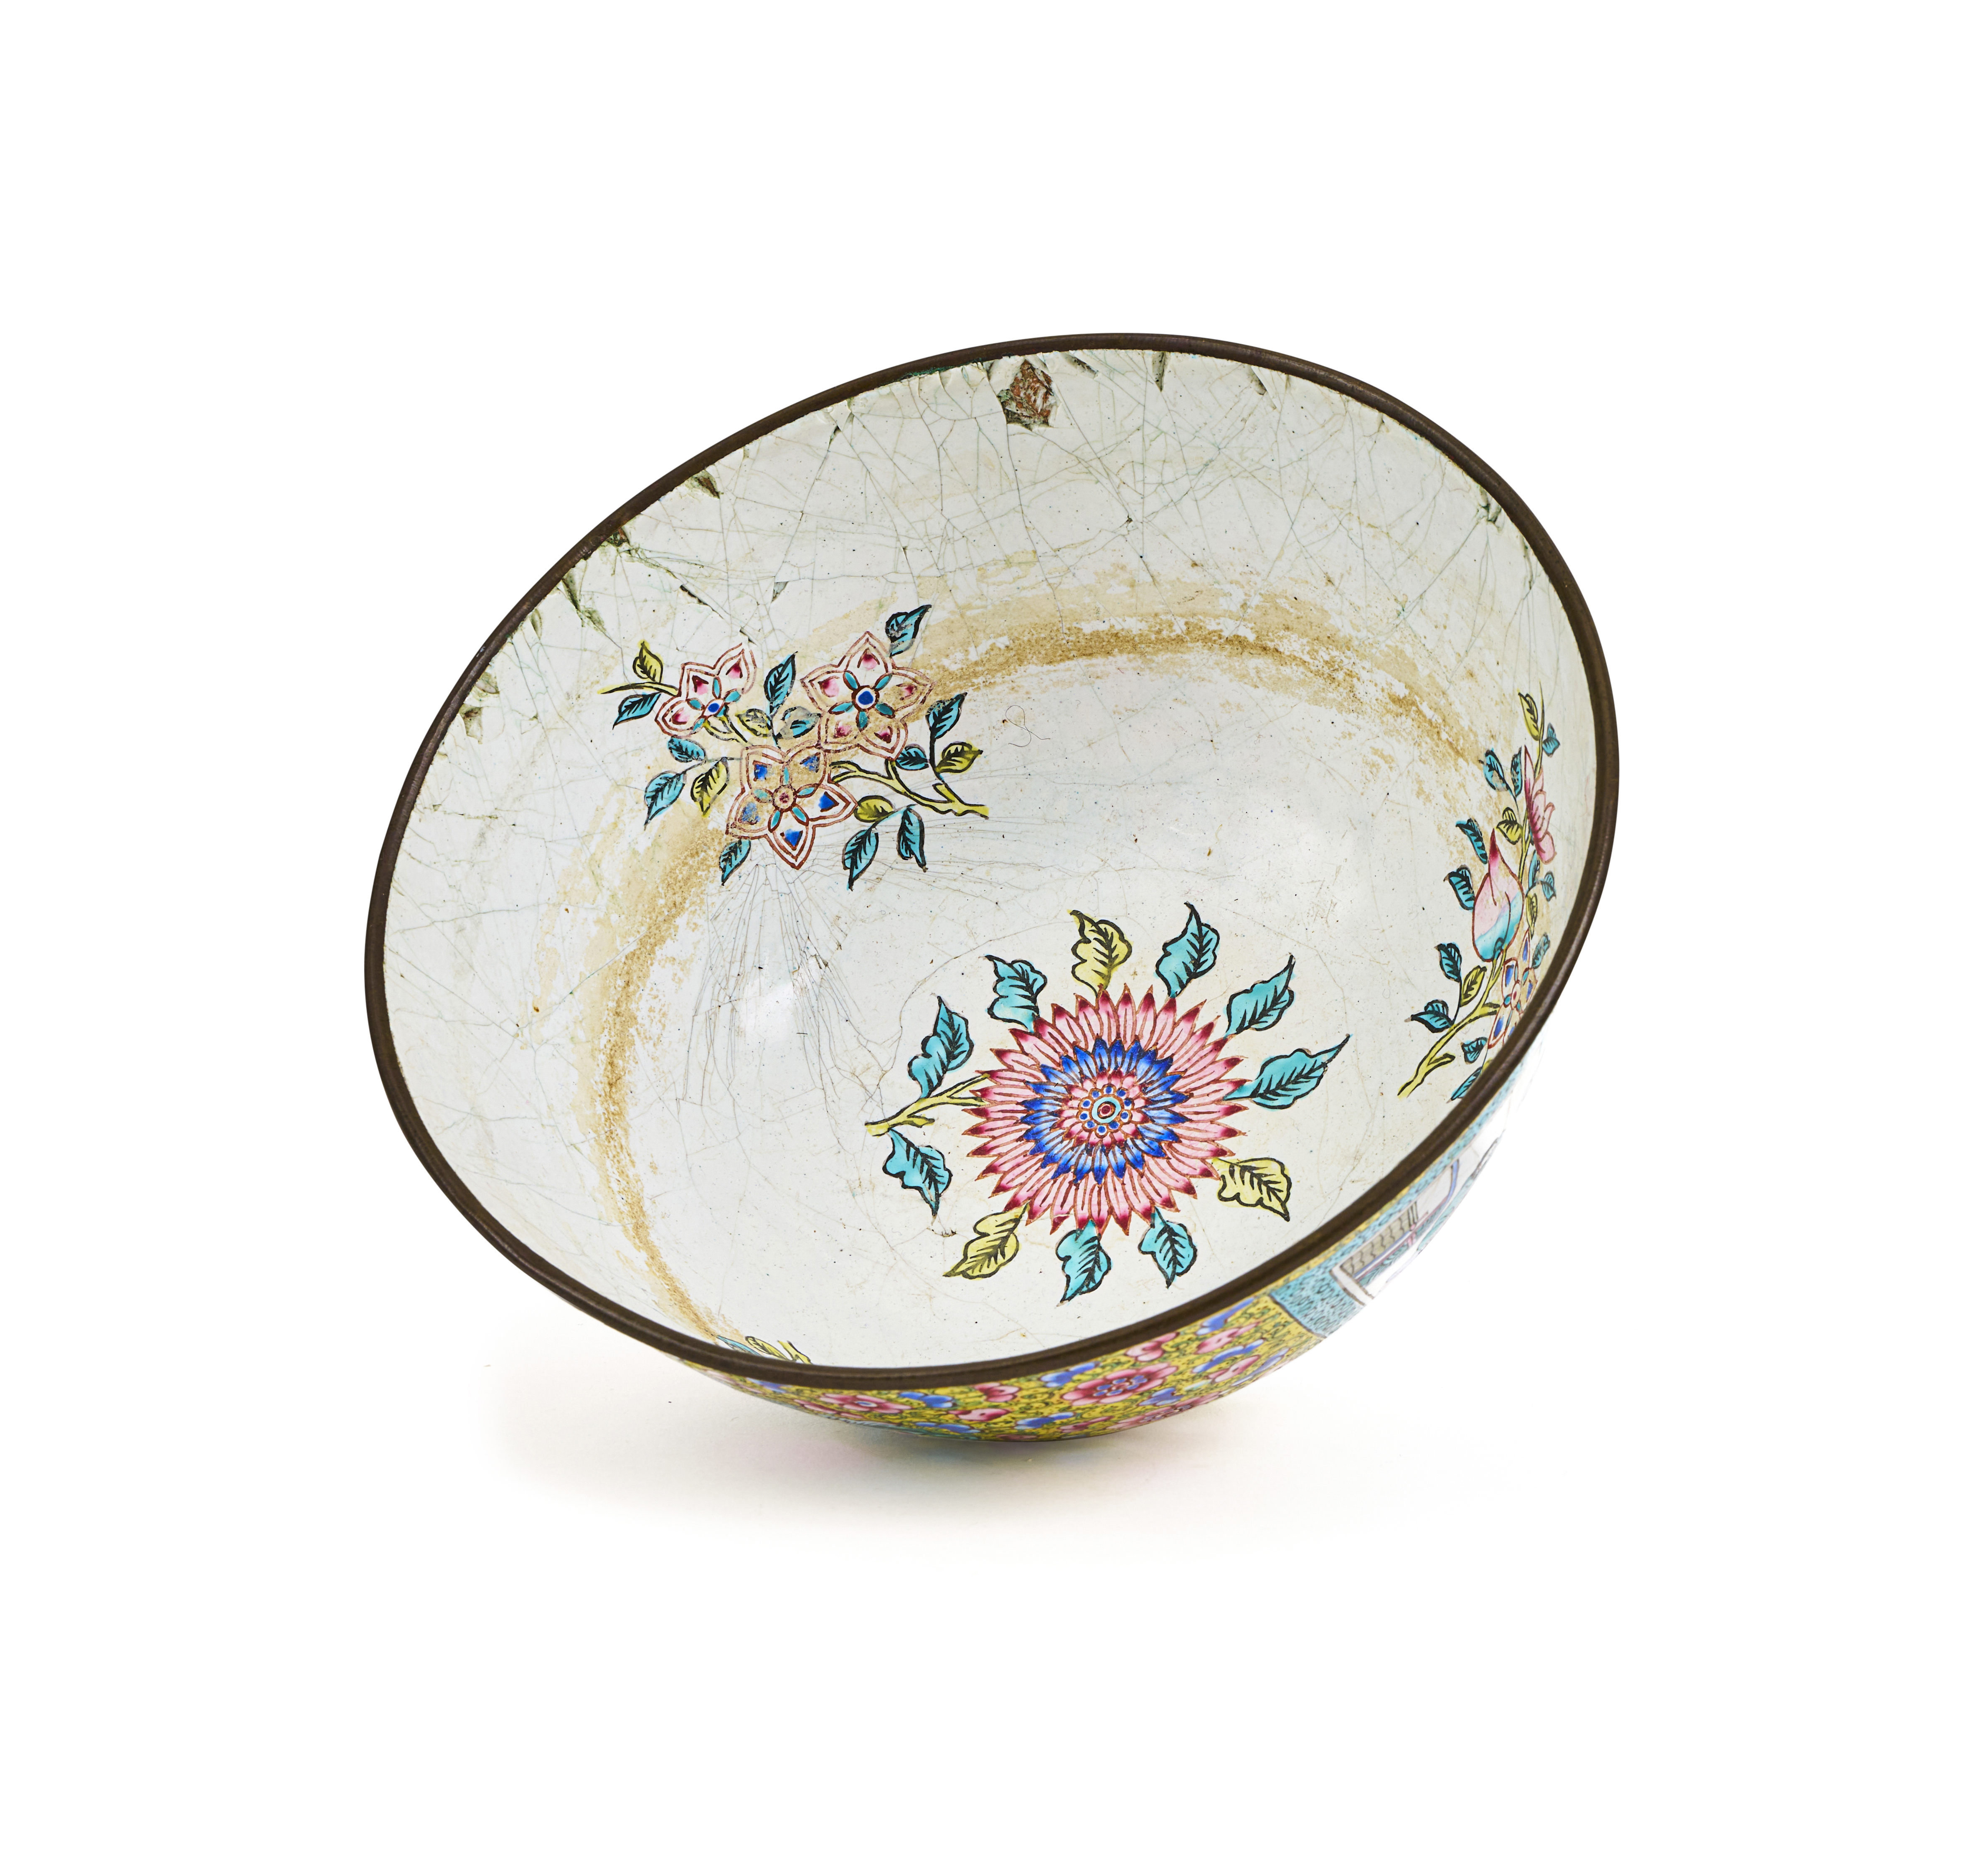 A CHINESE CANTON ENAMEL BOWL AND A LIDDED BOX, QING DYNASTY (1644-1911) - Image 5 of 12